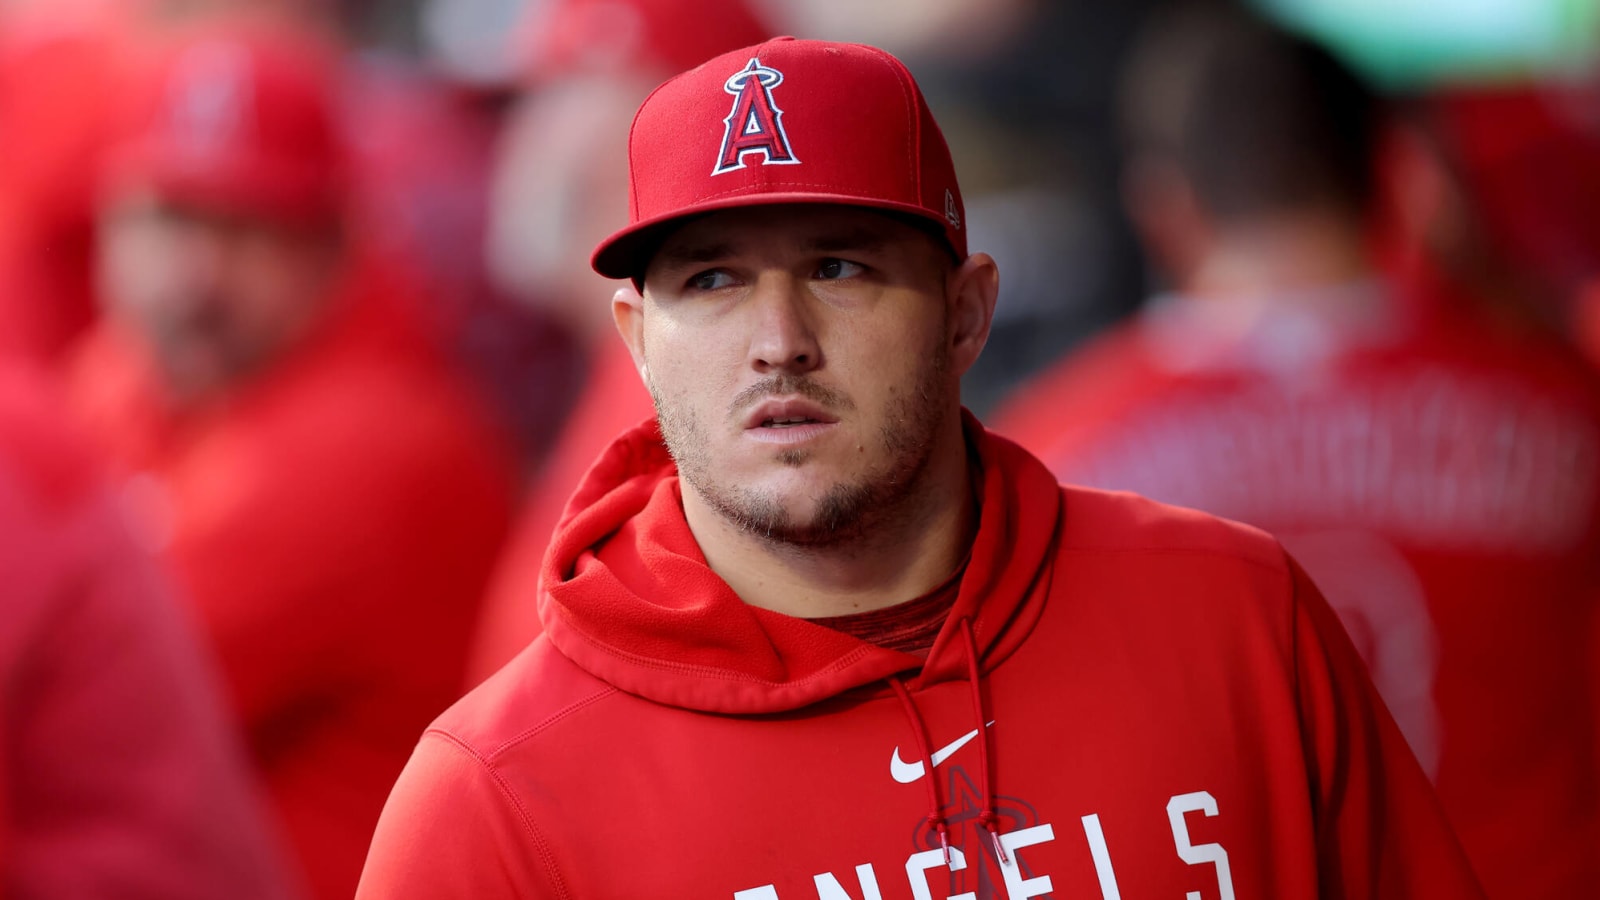 Mike Trout: Asking For Trade From Angels Would Be ‘Easy Way Out’